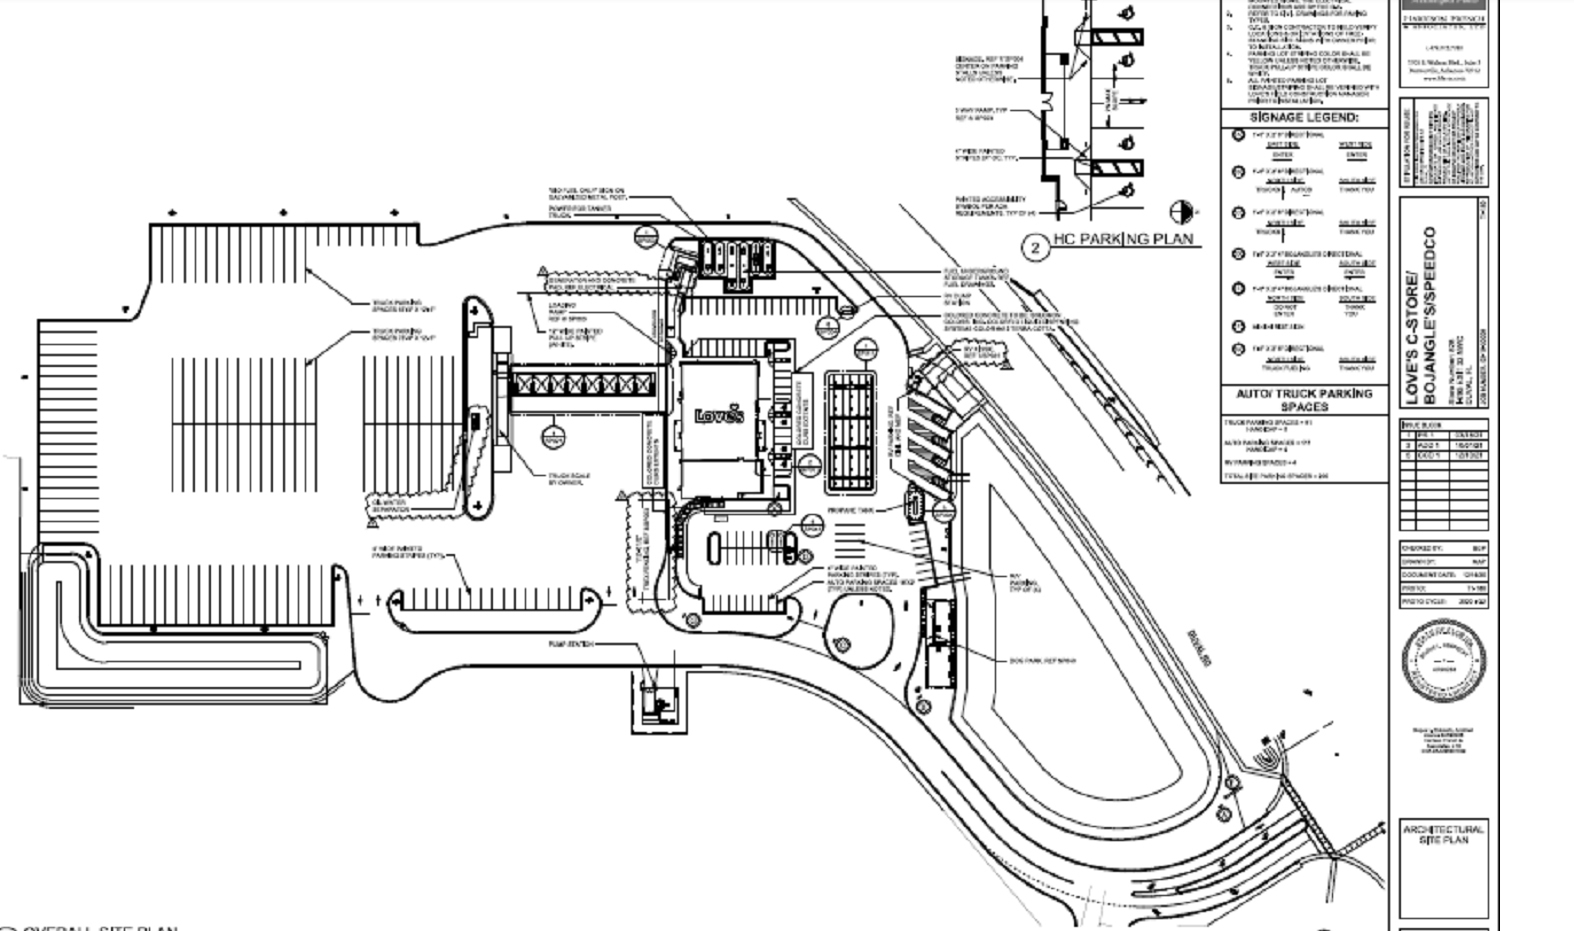 The site plan for the Duval Road Love's.